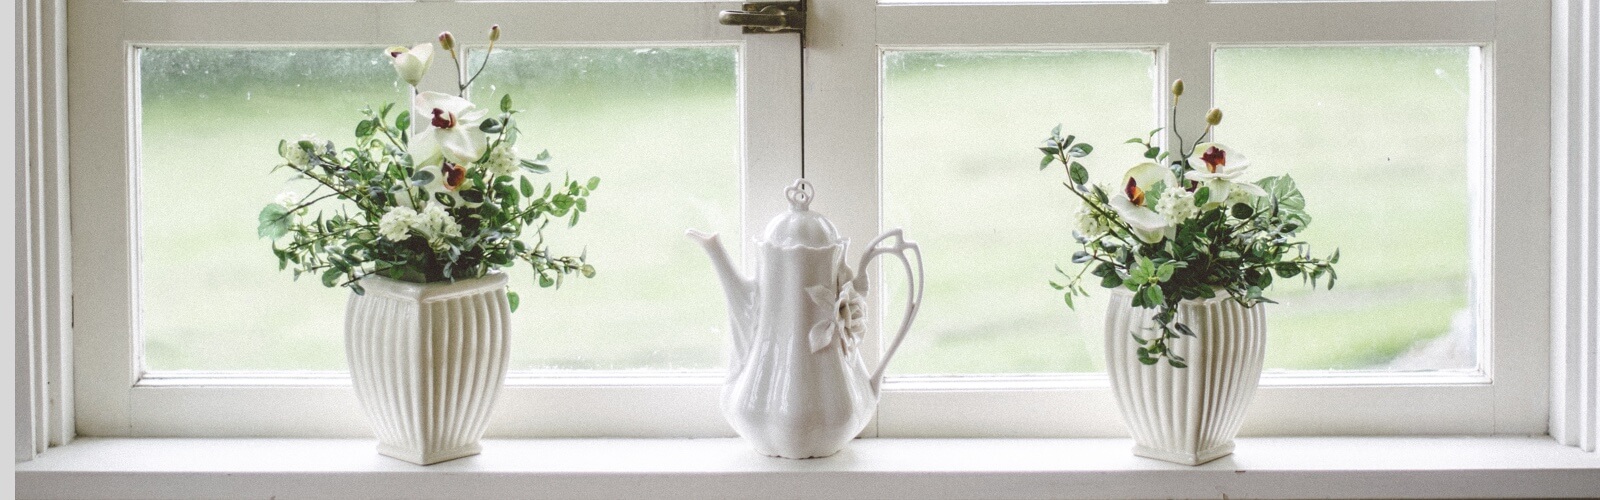 plants in pots and teapot on window sill